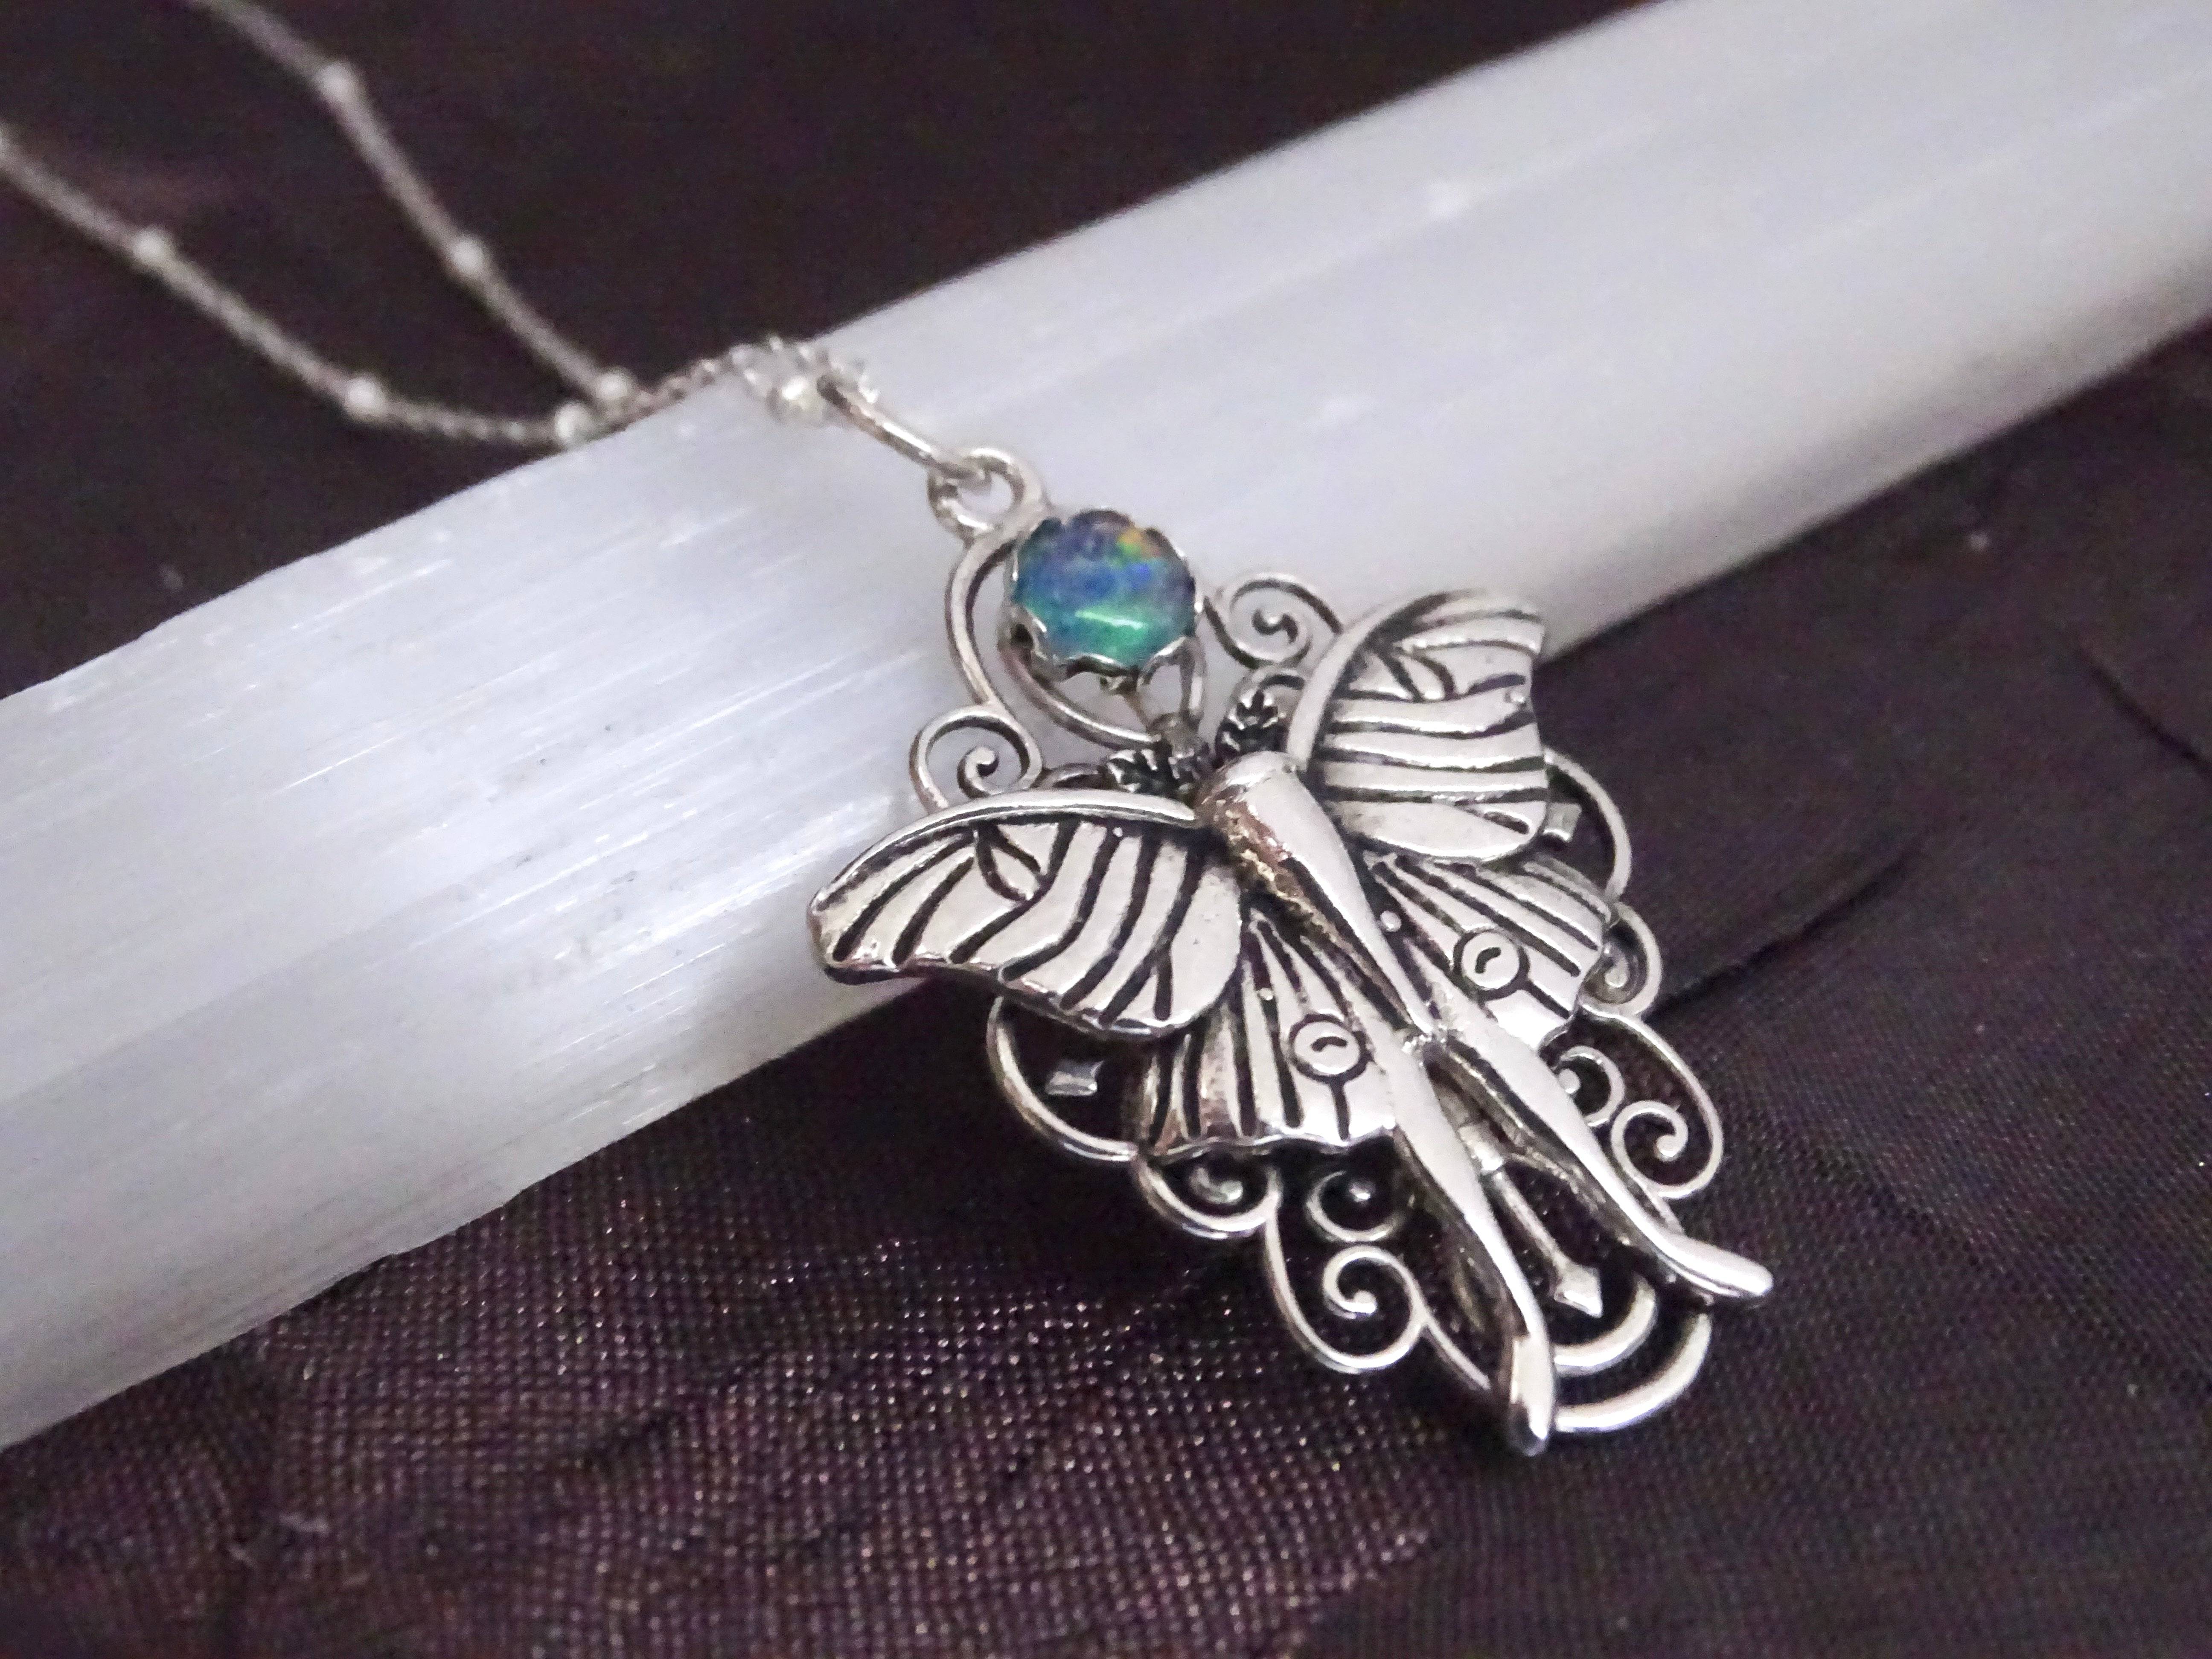 Fantasy Tooled Leather Luna Moth Necklace With Blue Labradorite Moon Moth  Pendant Handmade Artisan Jewelry Original Gift for Her - Etsy | Cosplay  jewelry, Artisan jewelry, Ceramic jewelry